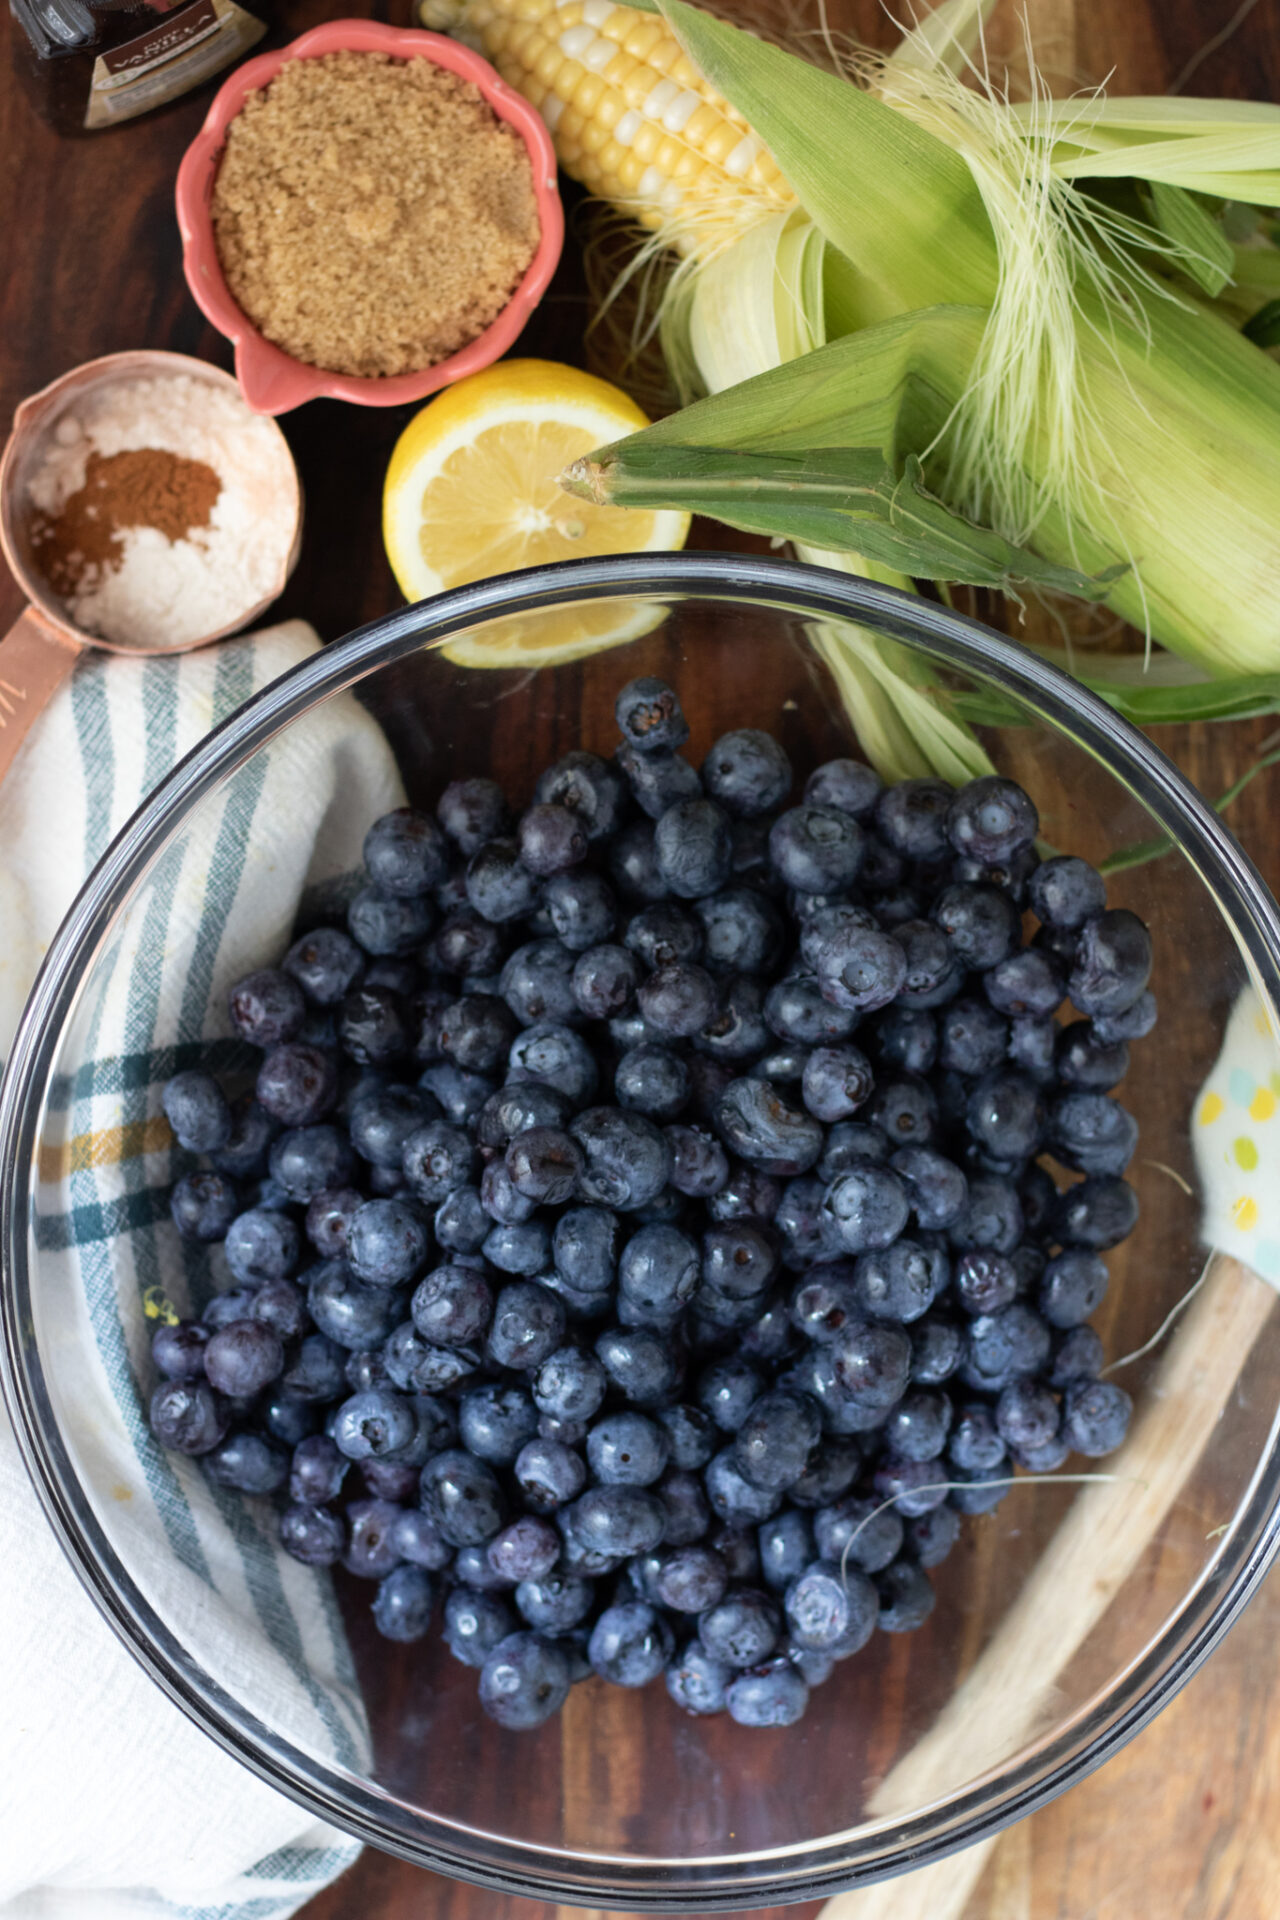 A large glass bowl filled with fresh blueberries. There's a small measuring cup with brown sugar, a half of a lemon, and an ear of corn in the background.